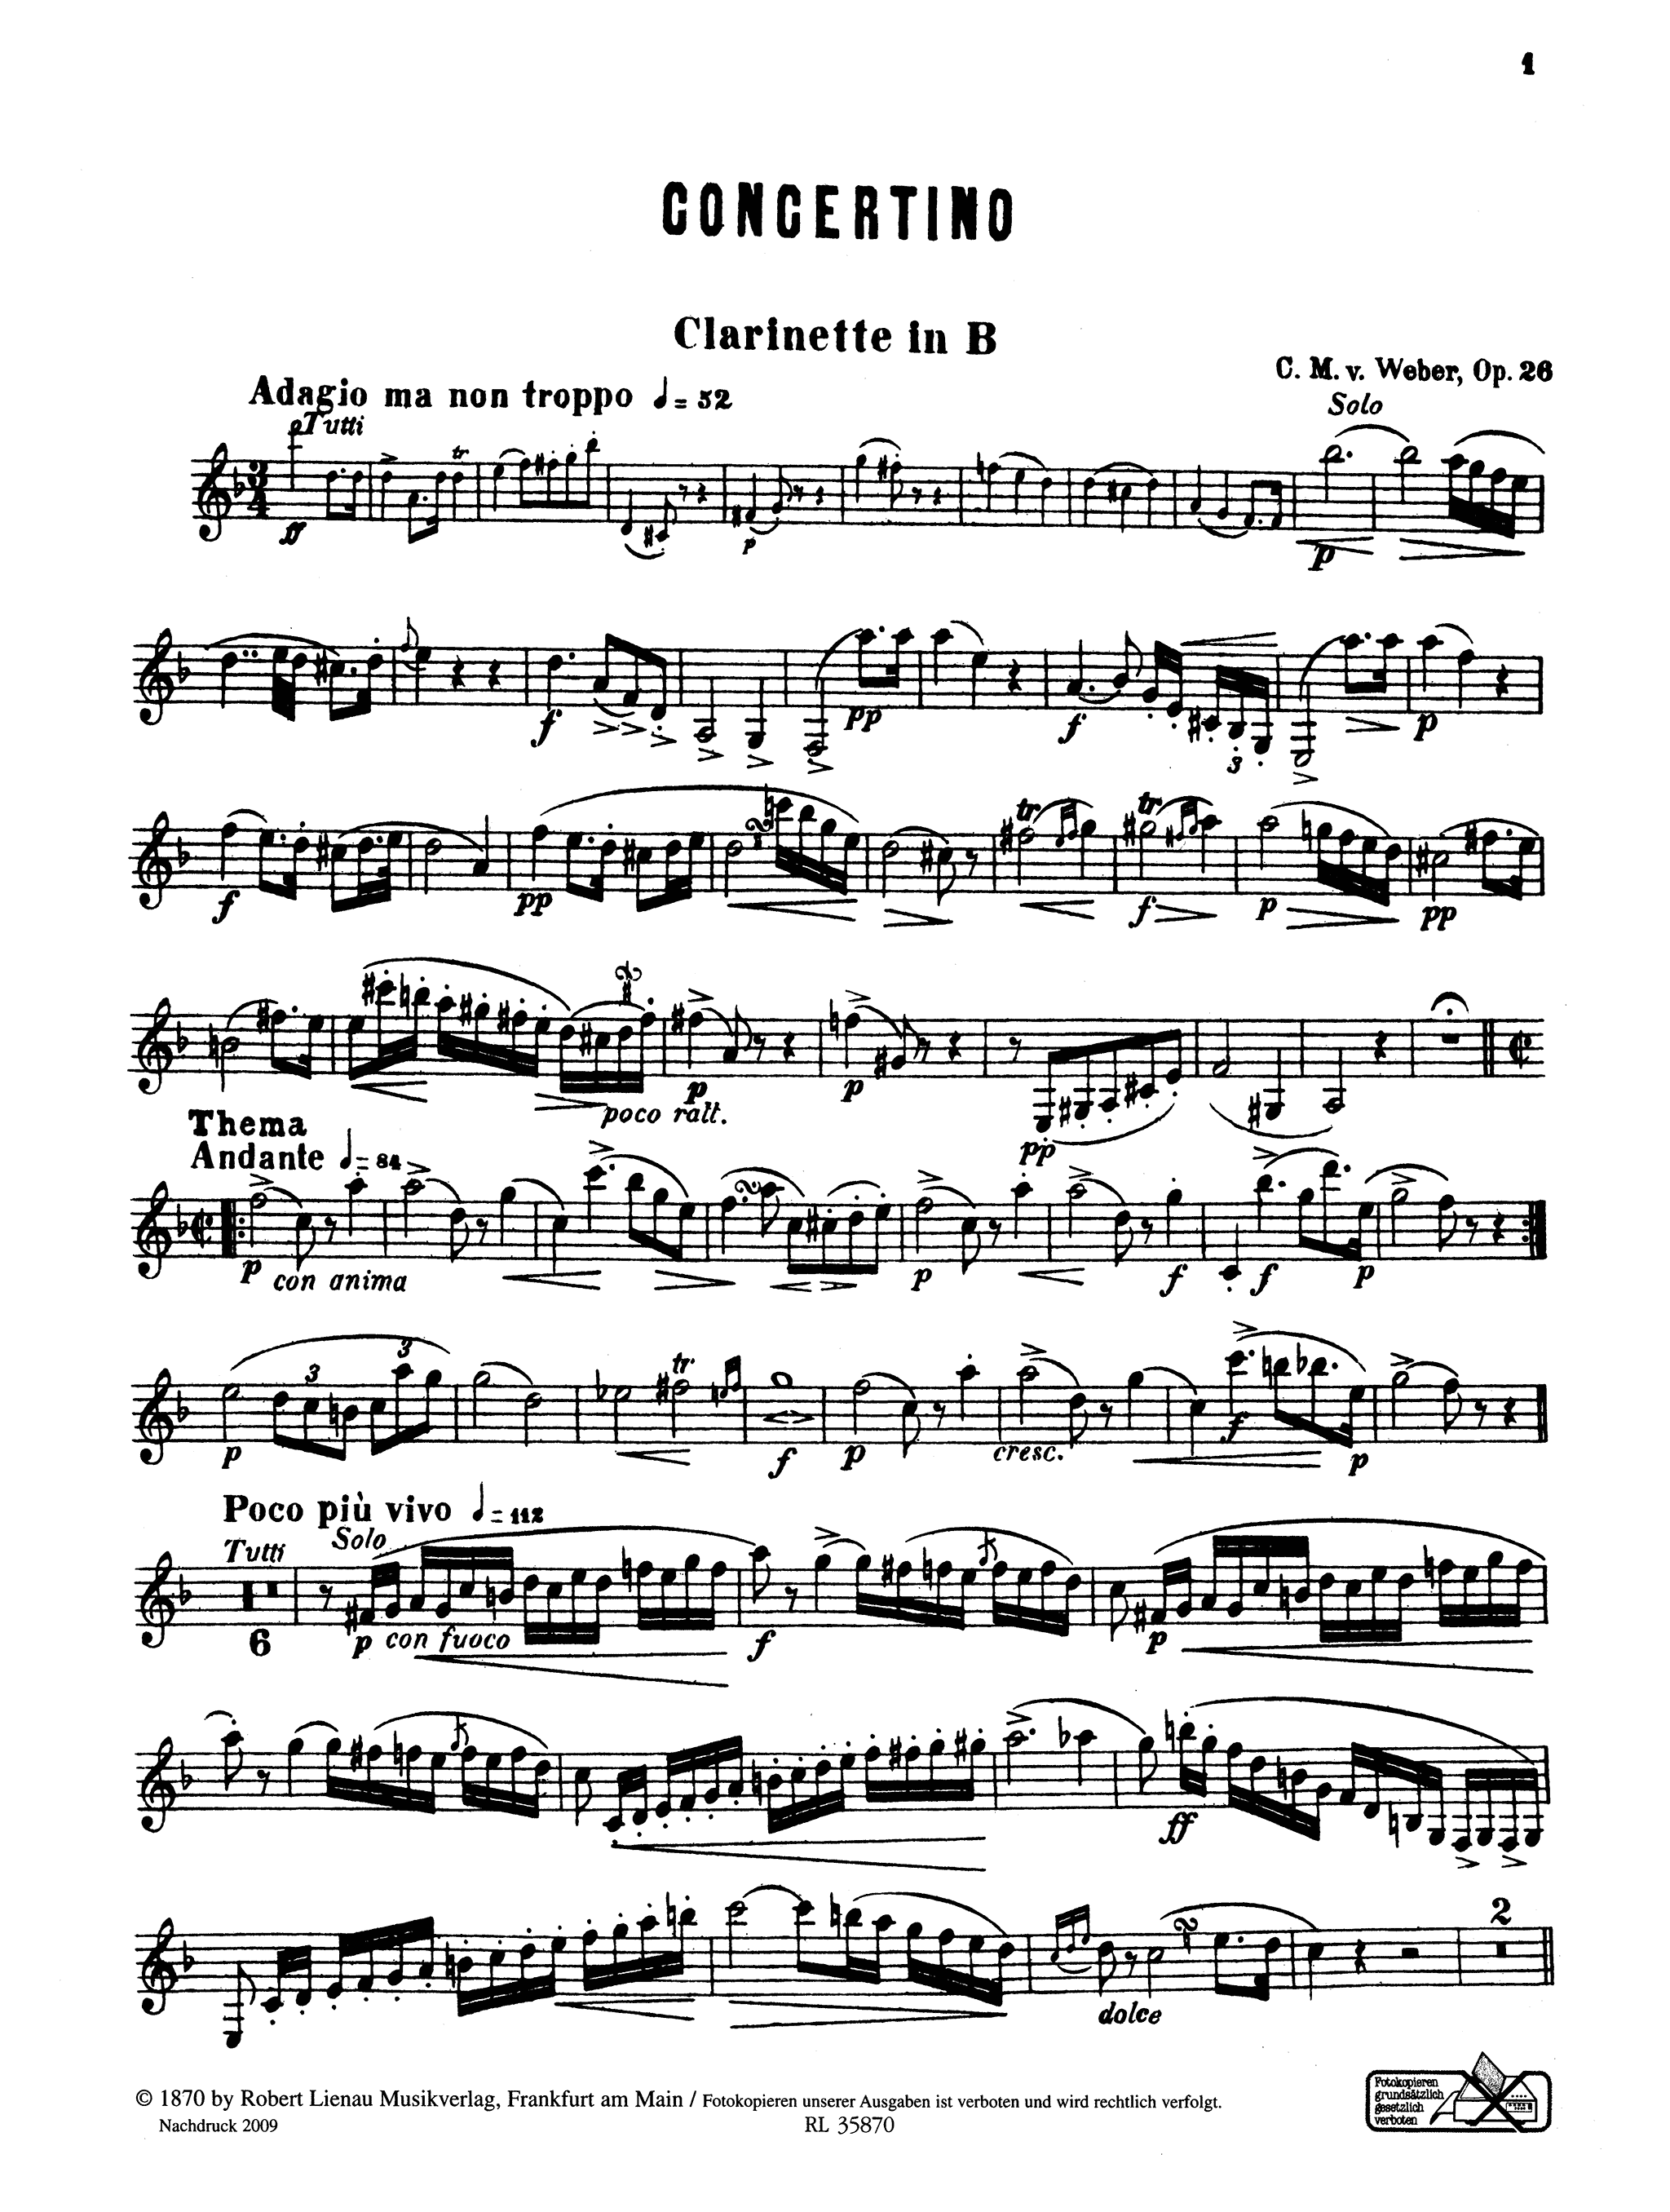 Concertino in E-flat Major, Op. 26 Clarinet part